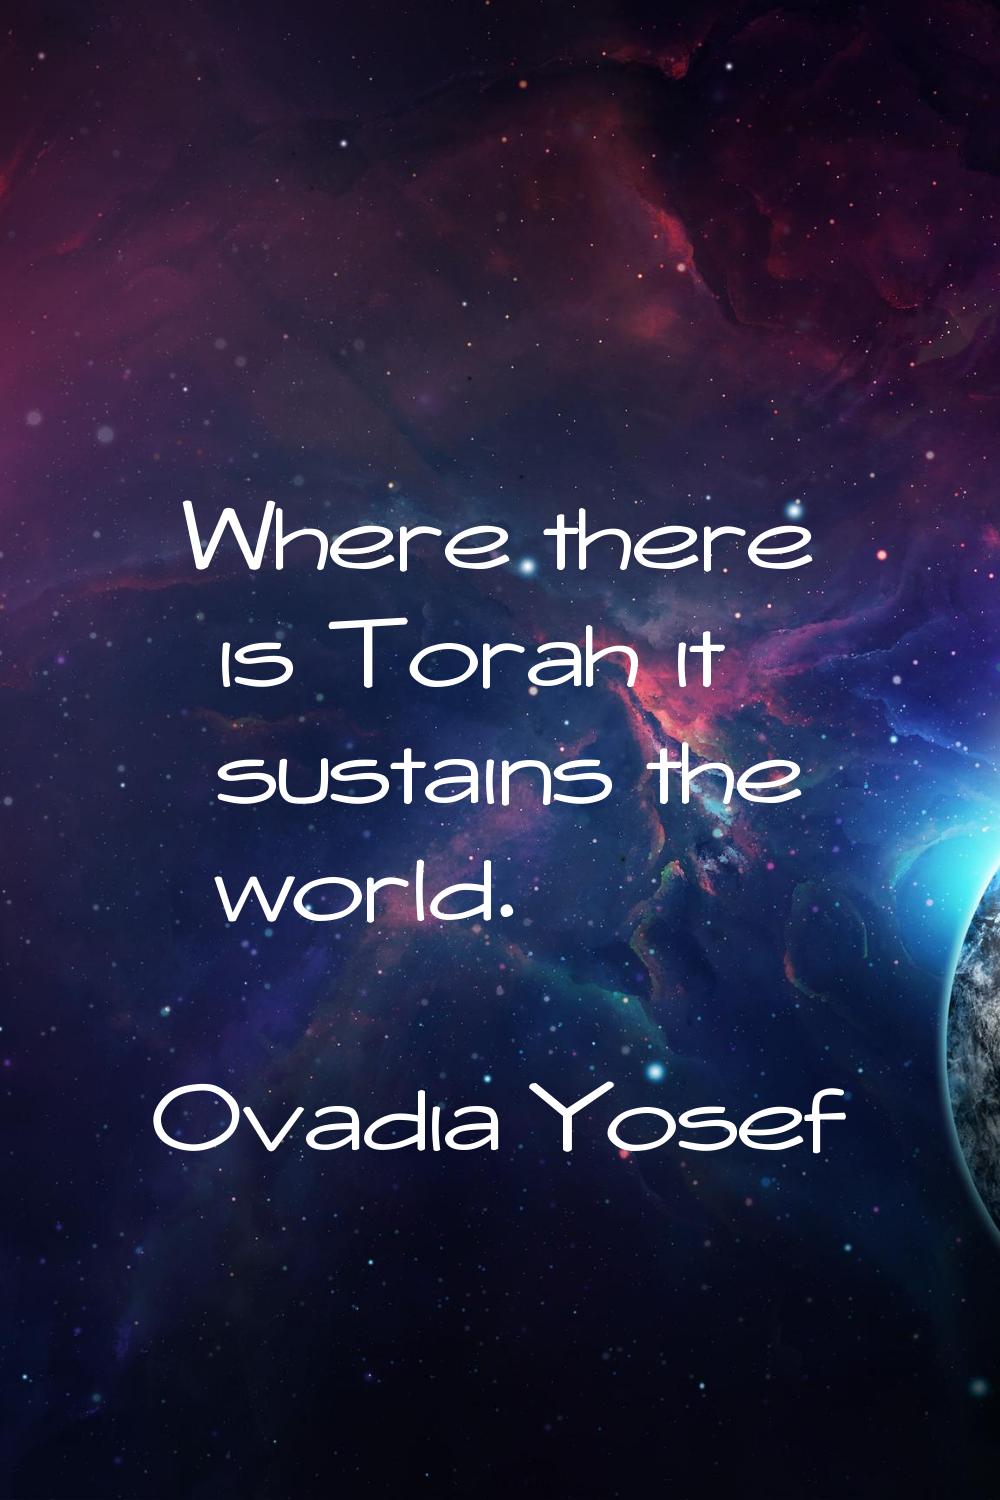 Where there is Torah it sustains the world.